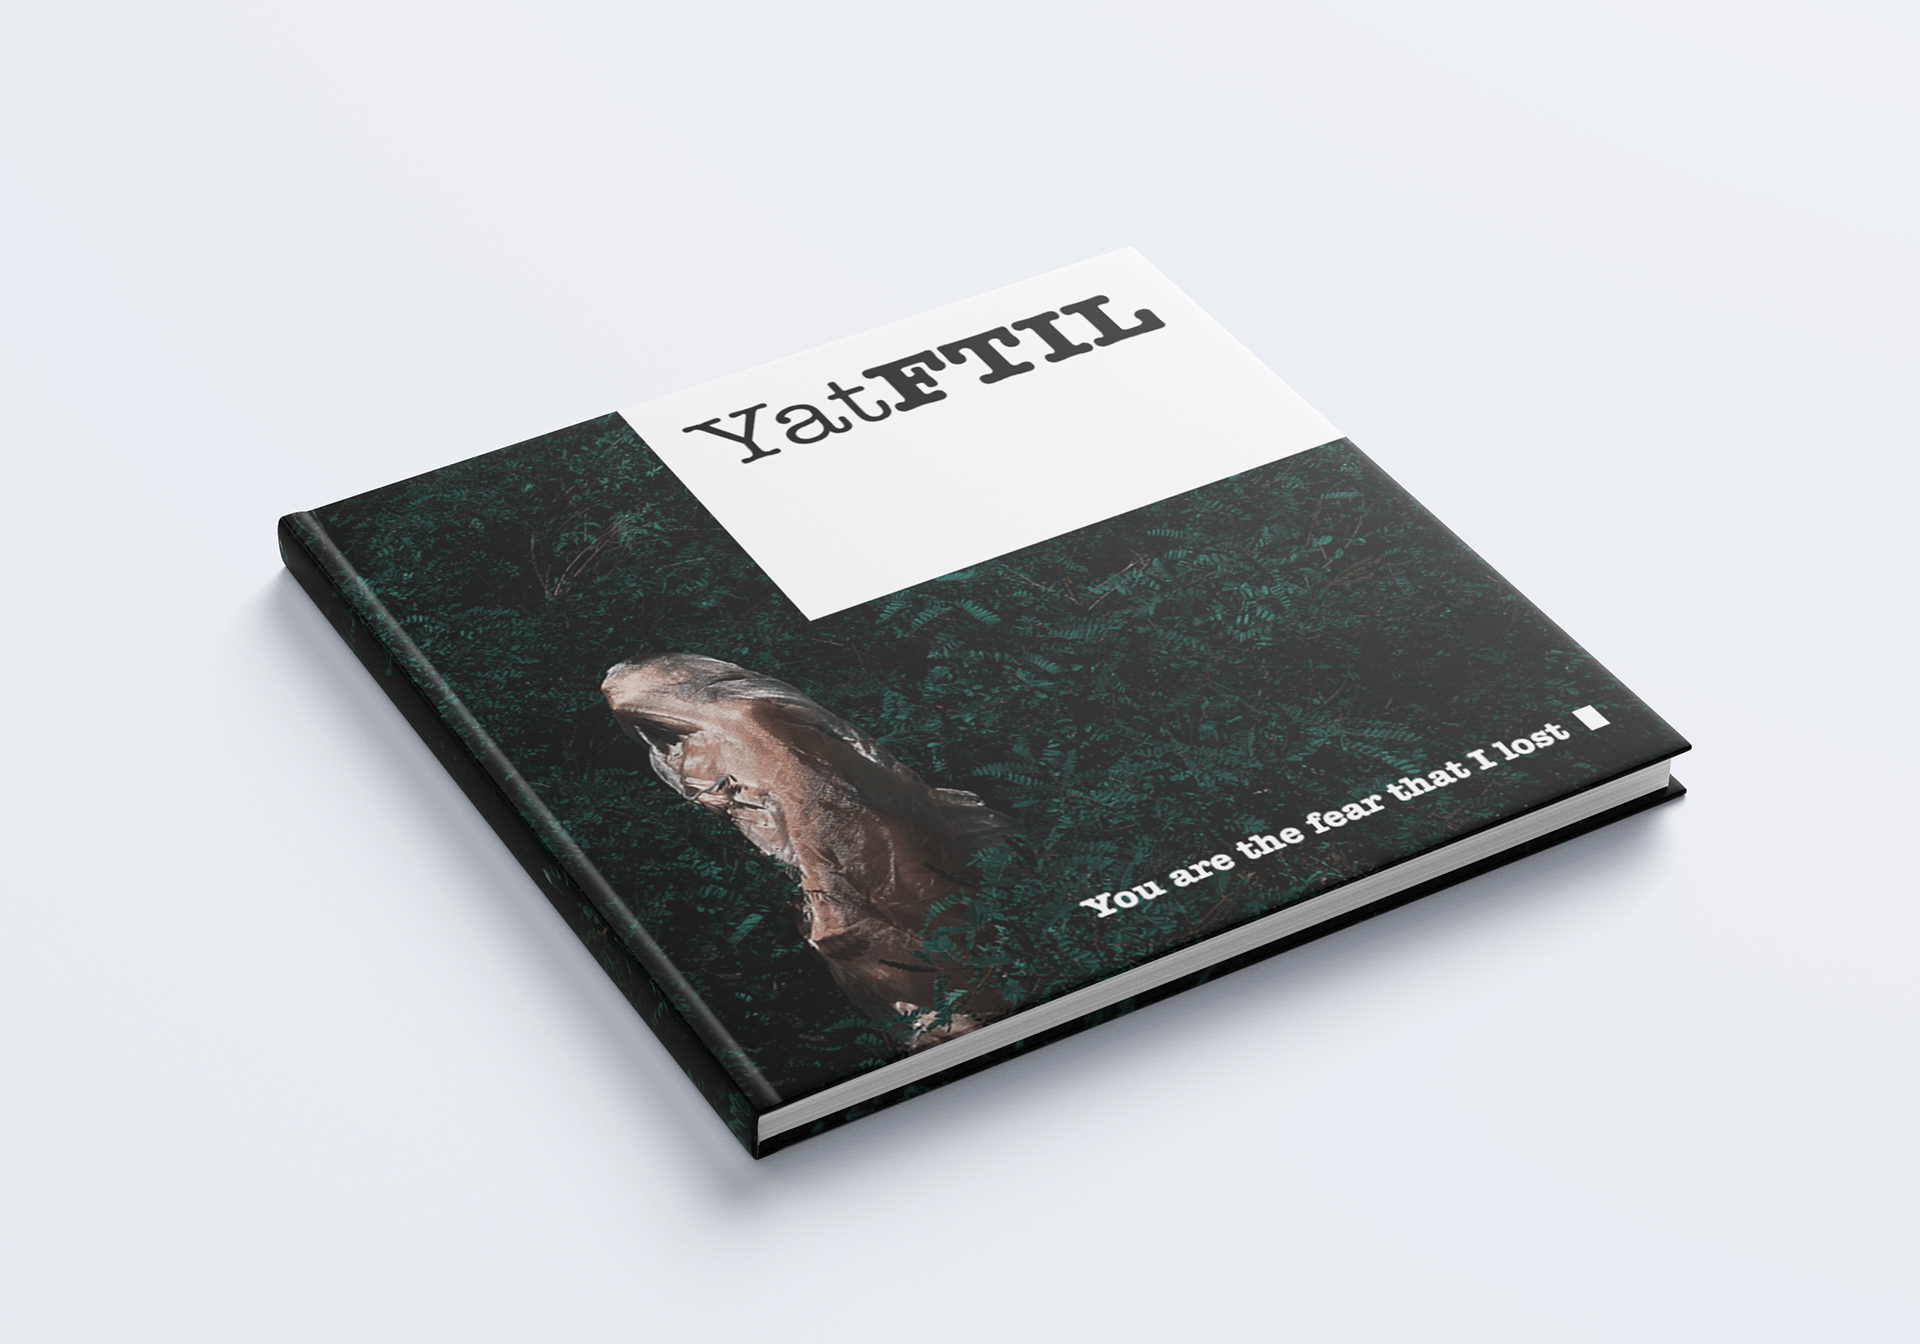 Book for photographer, shows the book layout and branding development